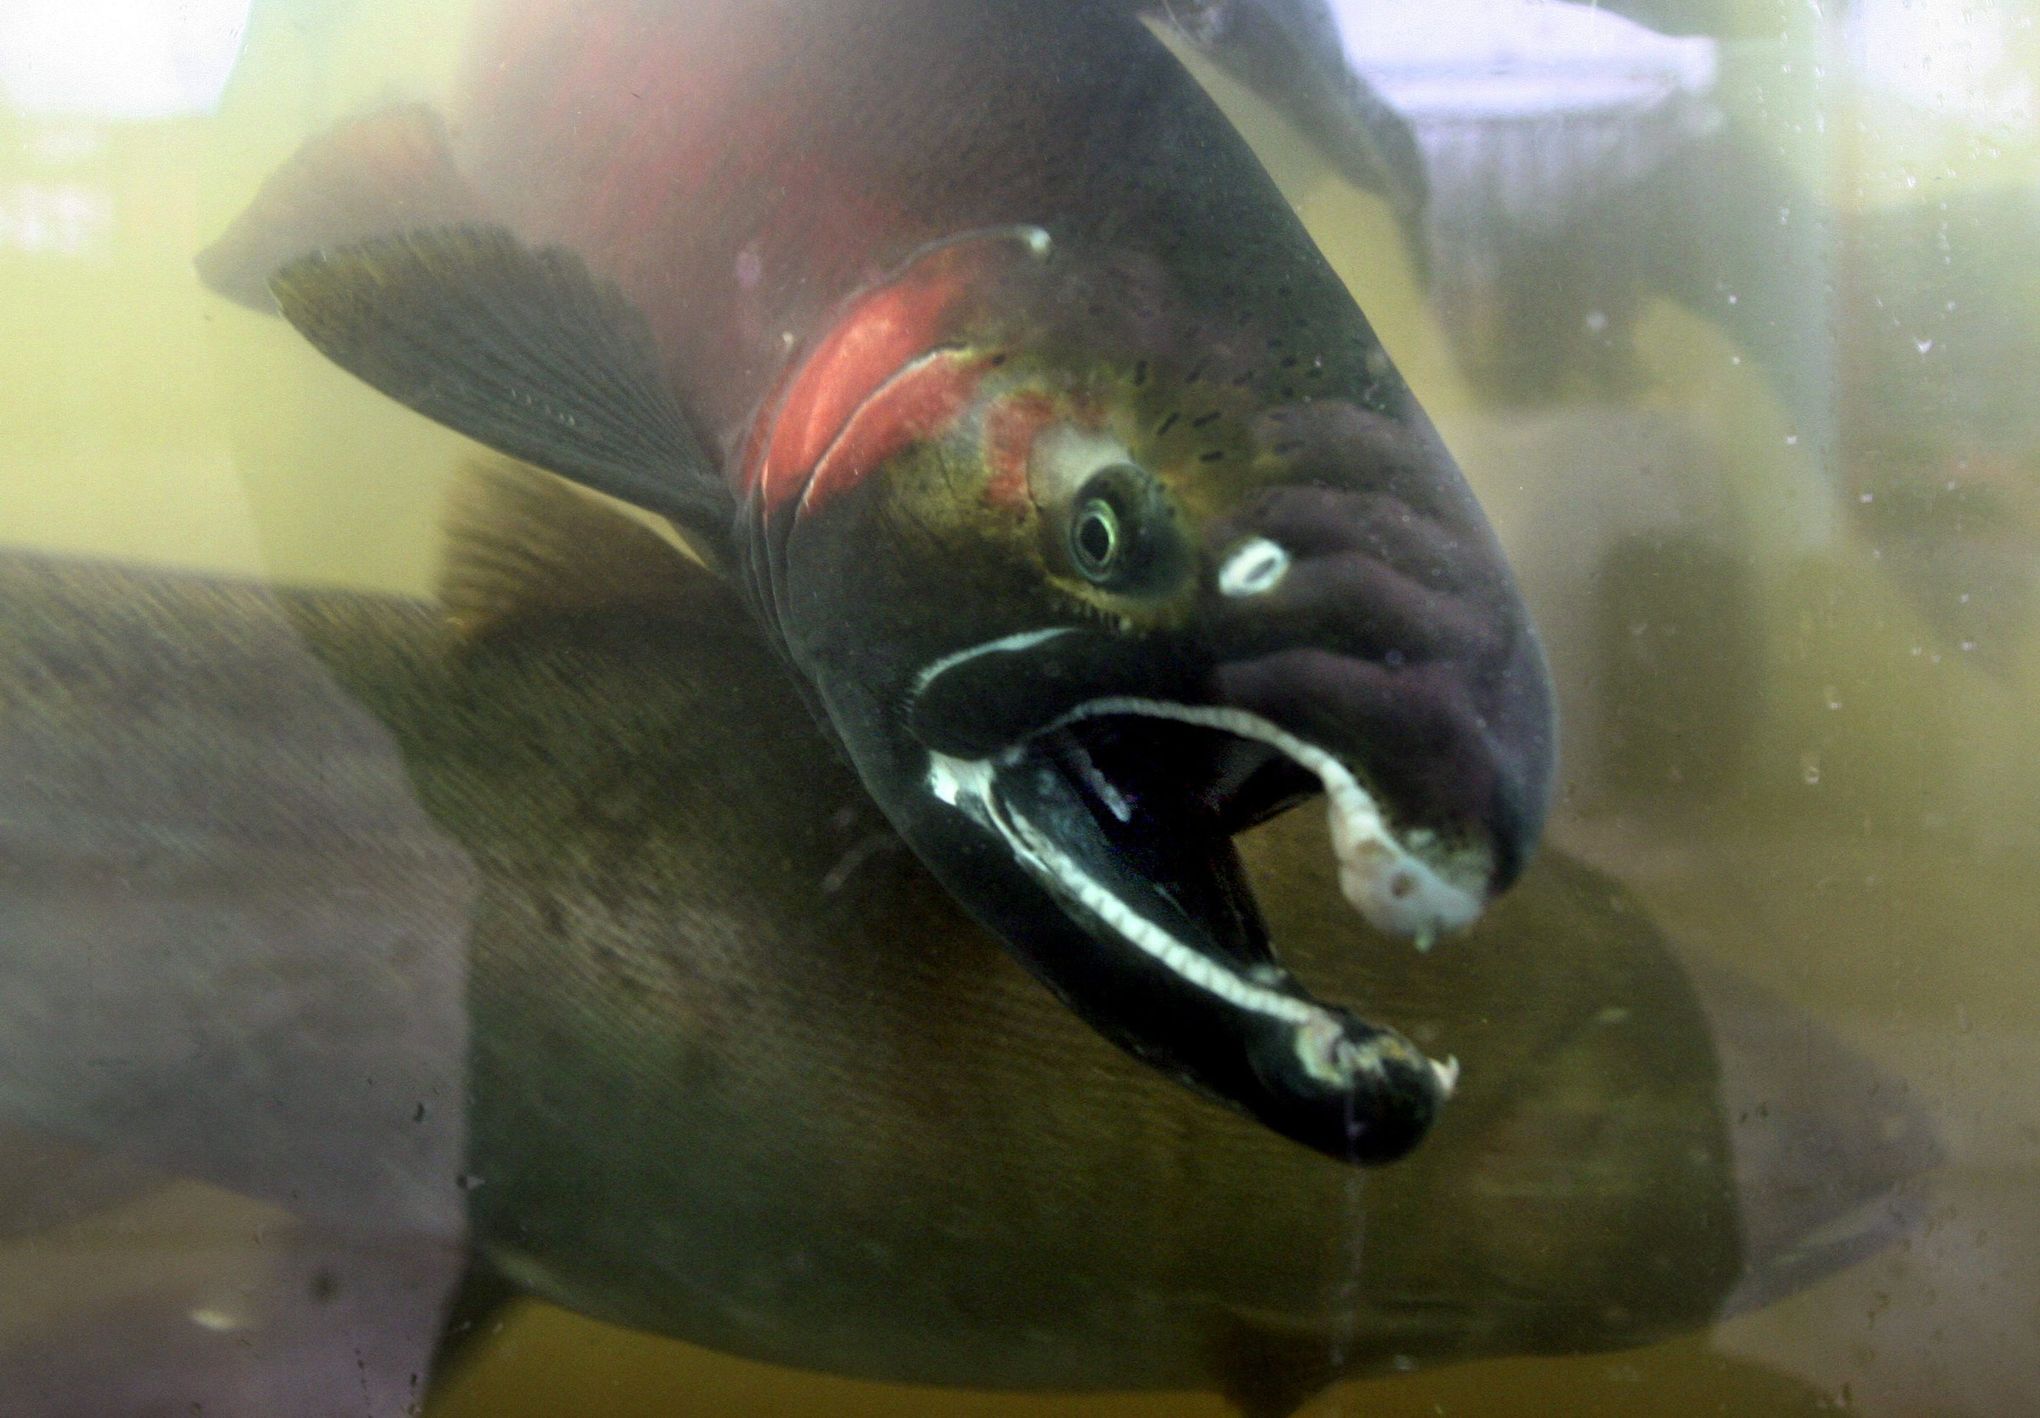 Toxic road runoff kills adult coho salmon in hours, study finds